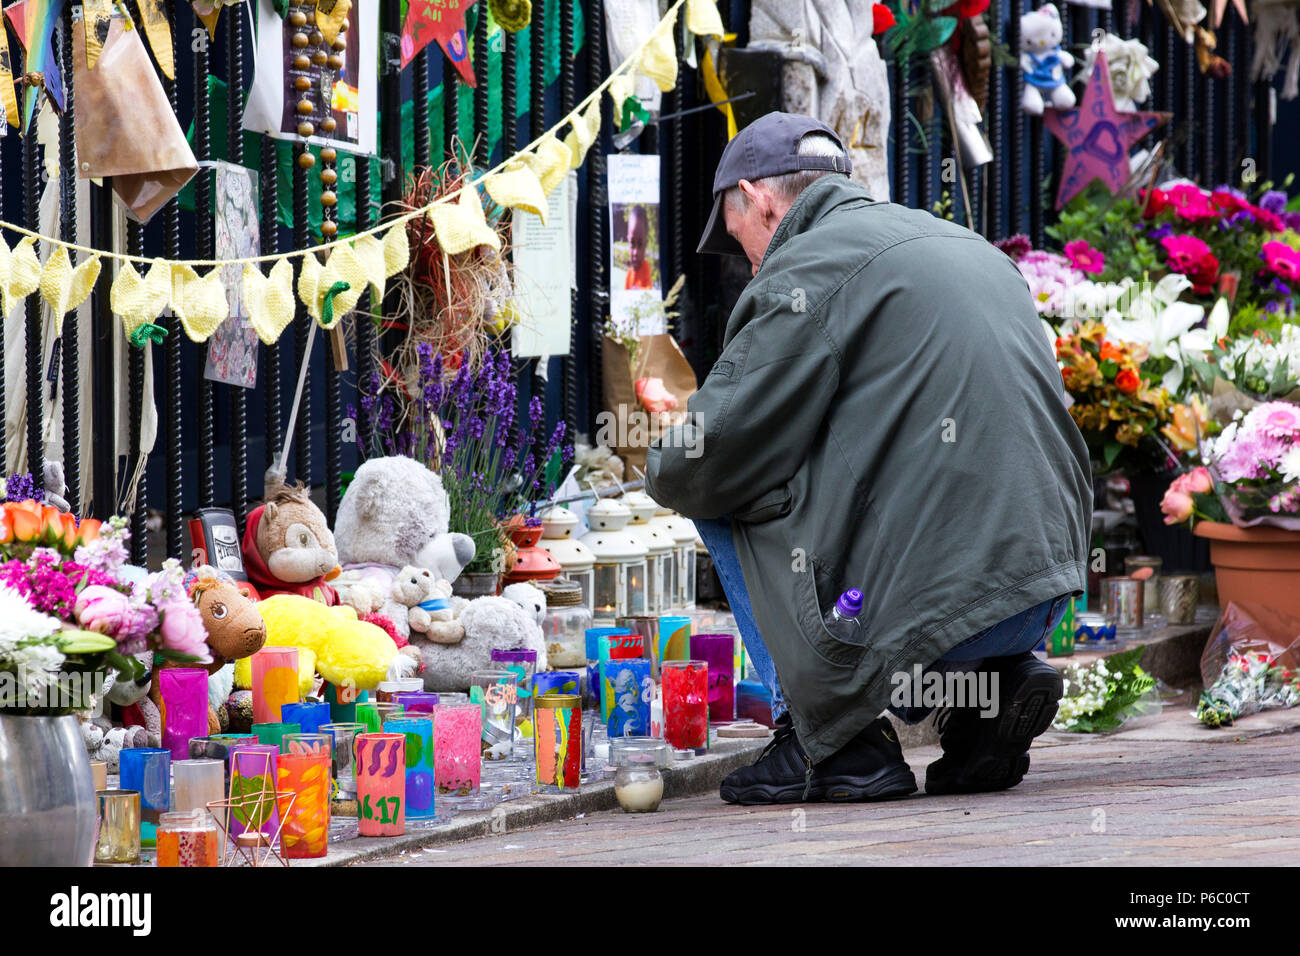 The first anniversary of the 24-storey Grenfell Tower block of public housing flats fire which claimed 72 lives. Man paying his respects at a memorial outside a church near the tower block.  South Kensington, London, UK, 14th June 2018. Stock Photo